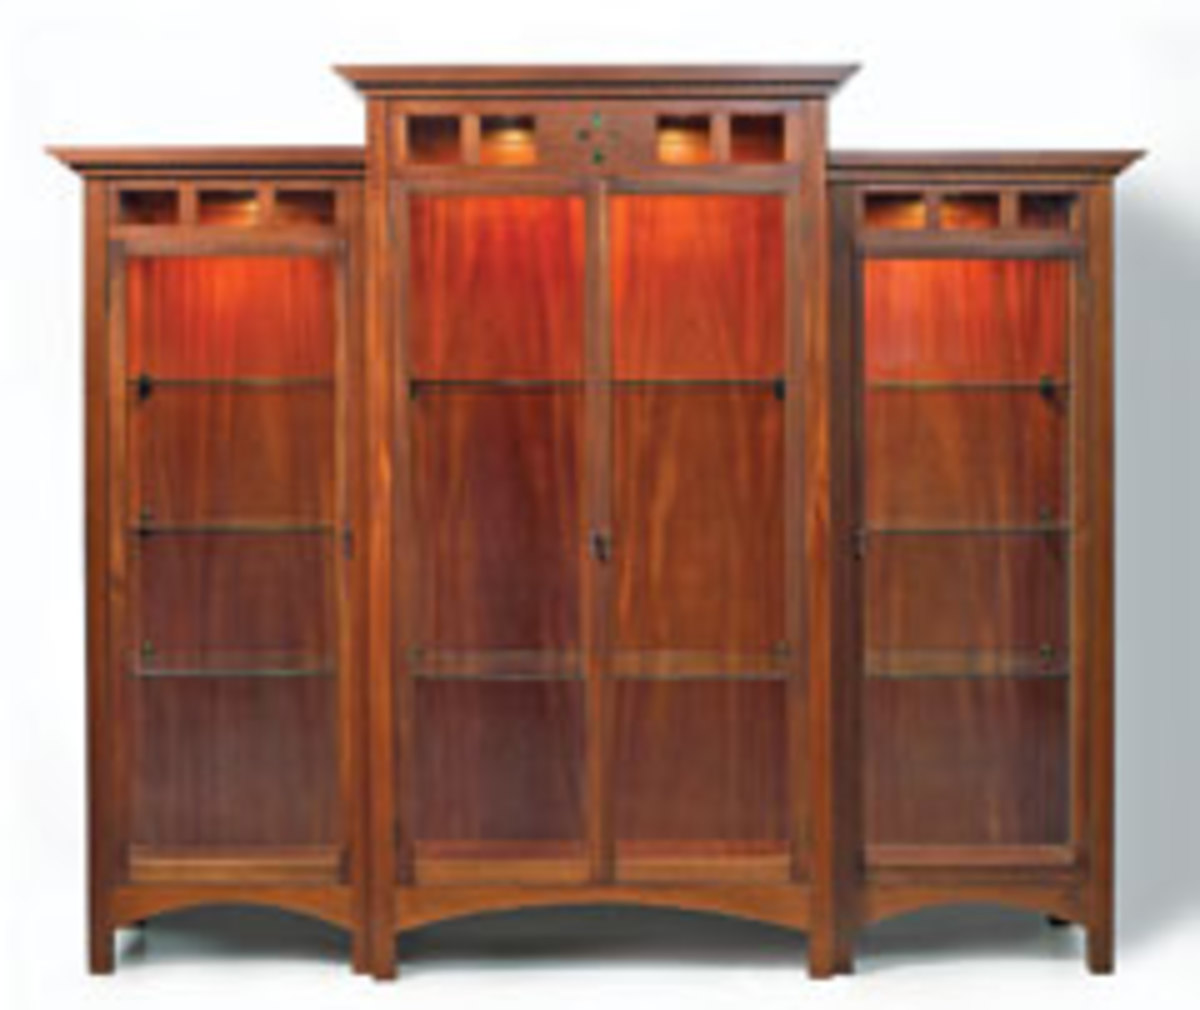 The partners have produced "The Three Sisters," which features mahogany and glass display cabinets inlaid with precious stones that also act as the switch for interior lights.